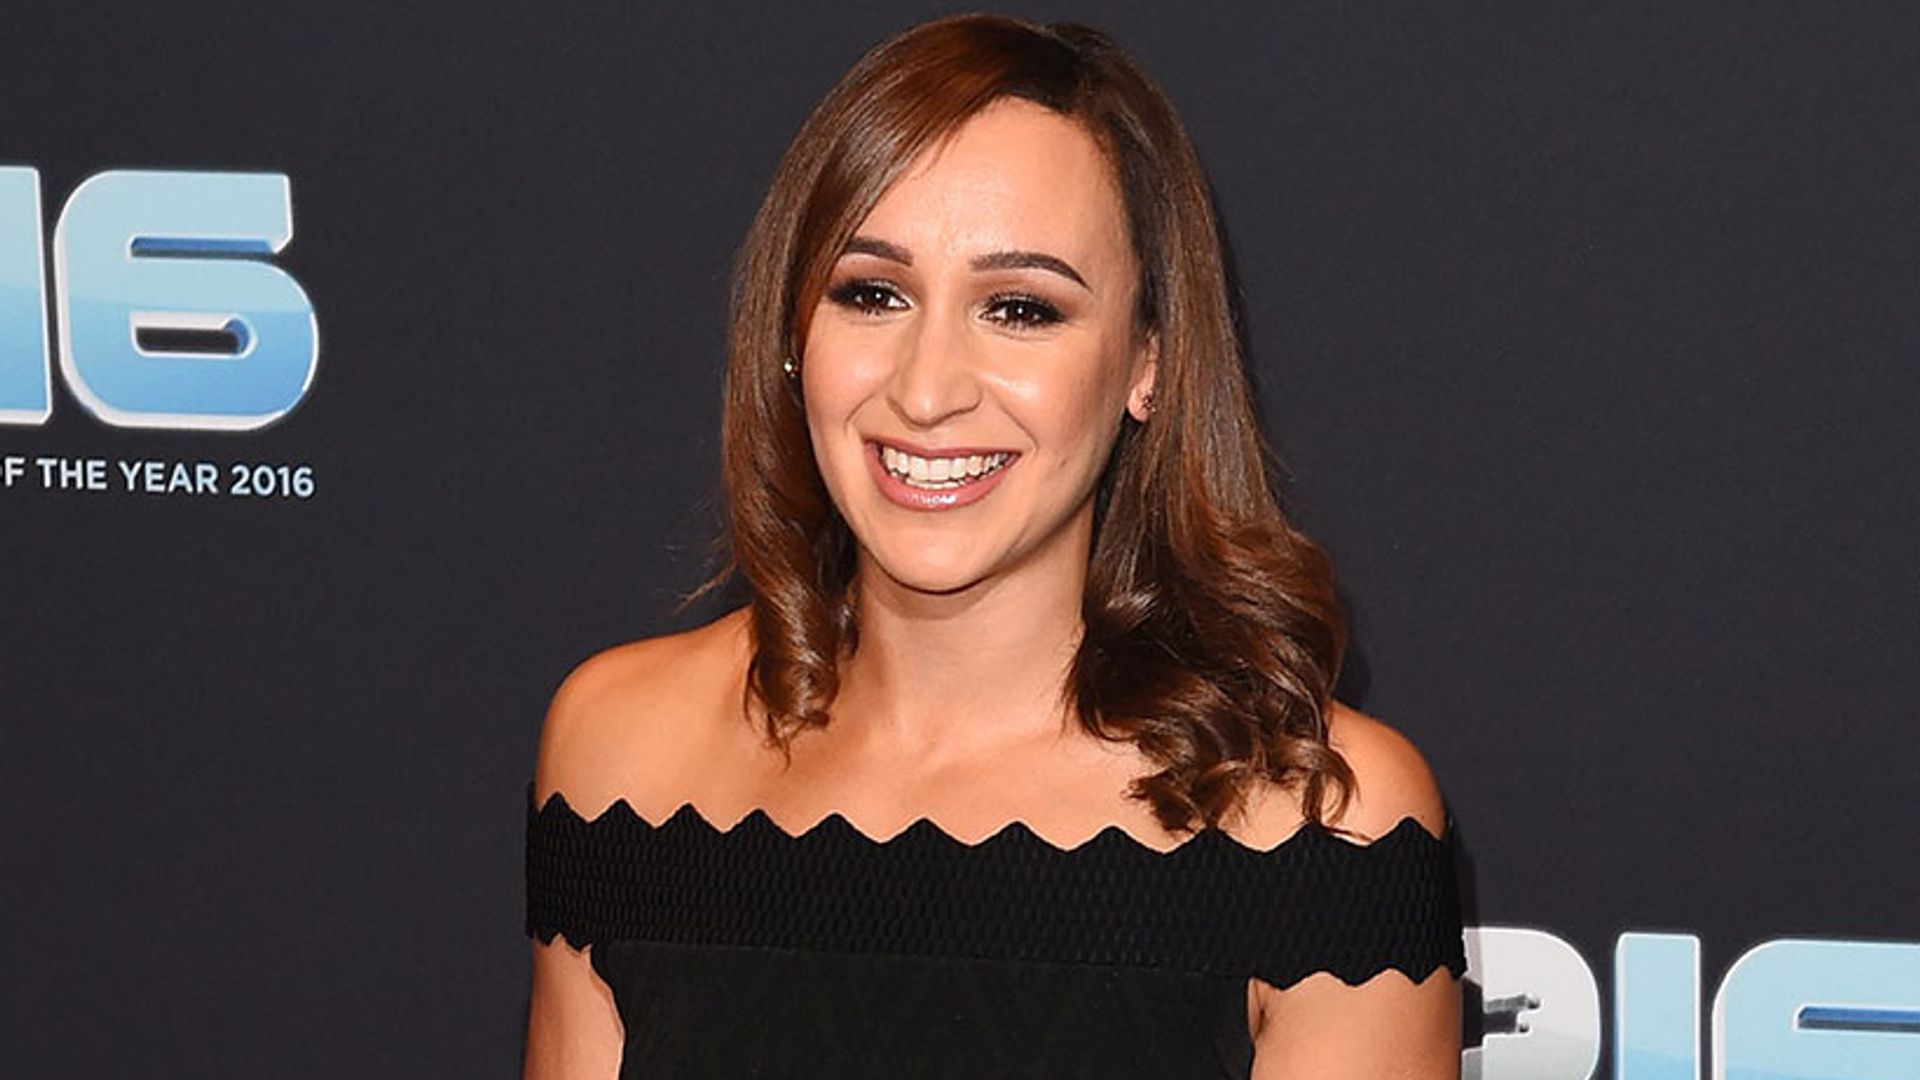 Proud mother Jessica Ennis-Hill shares cute picture of newborn daughter Olivia